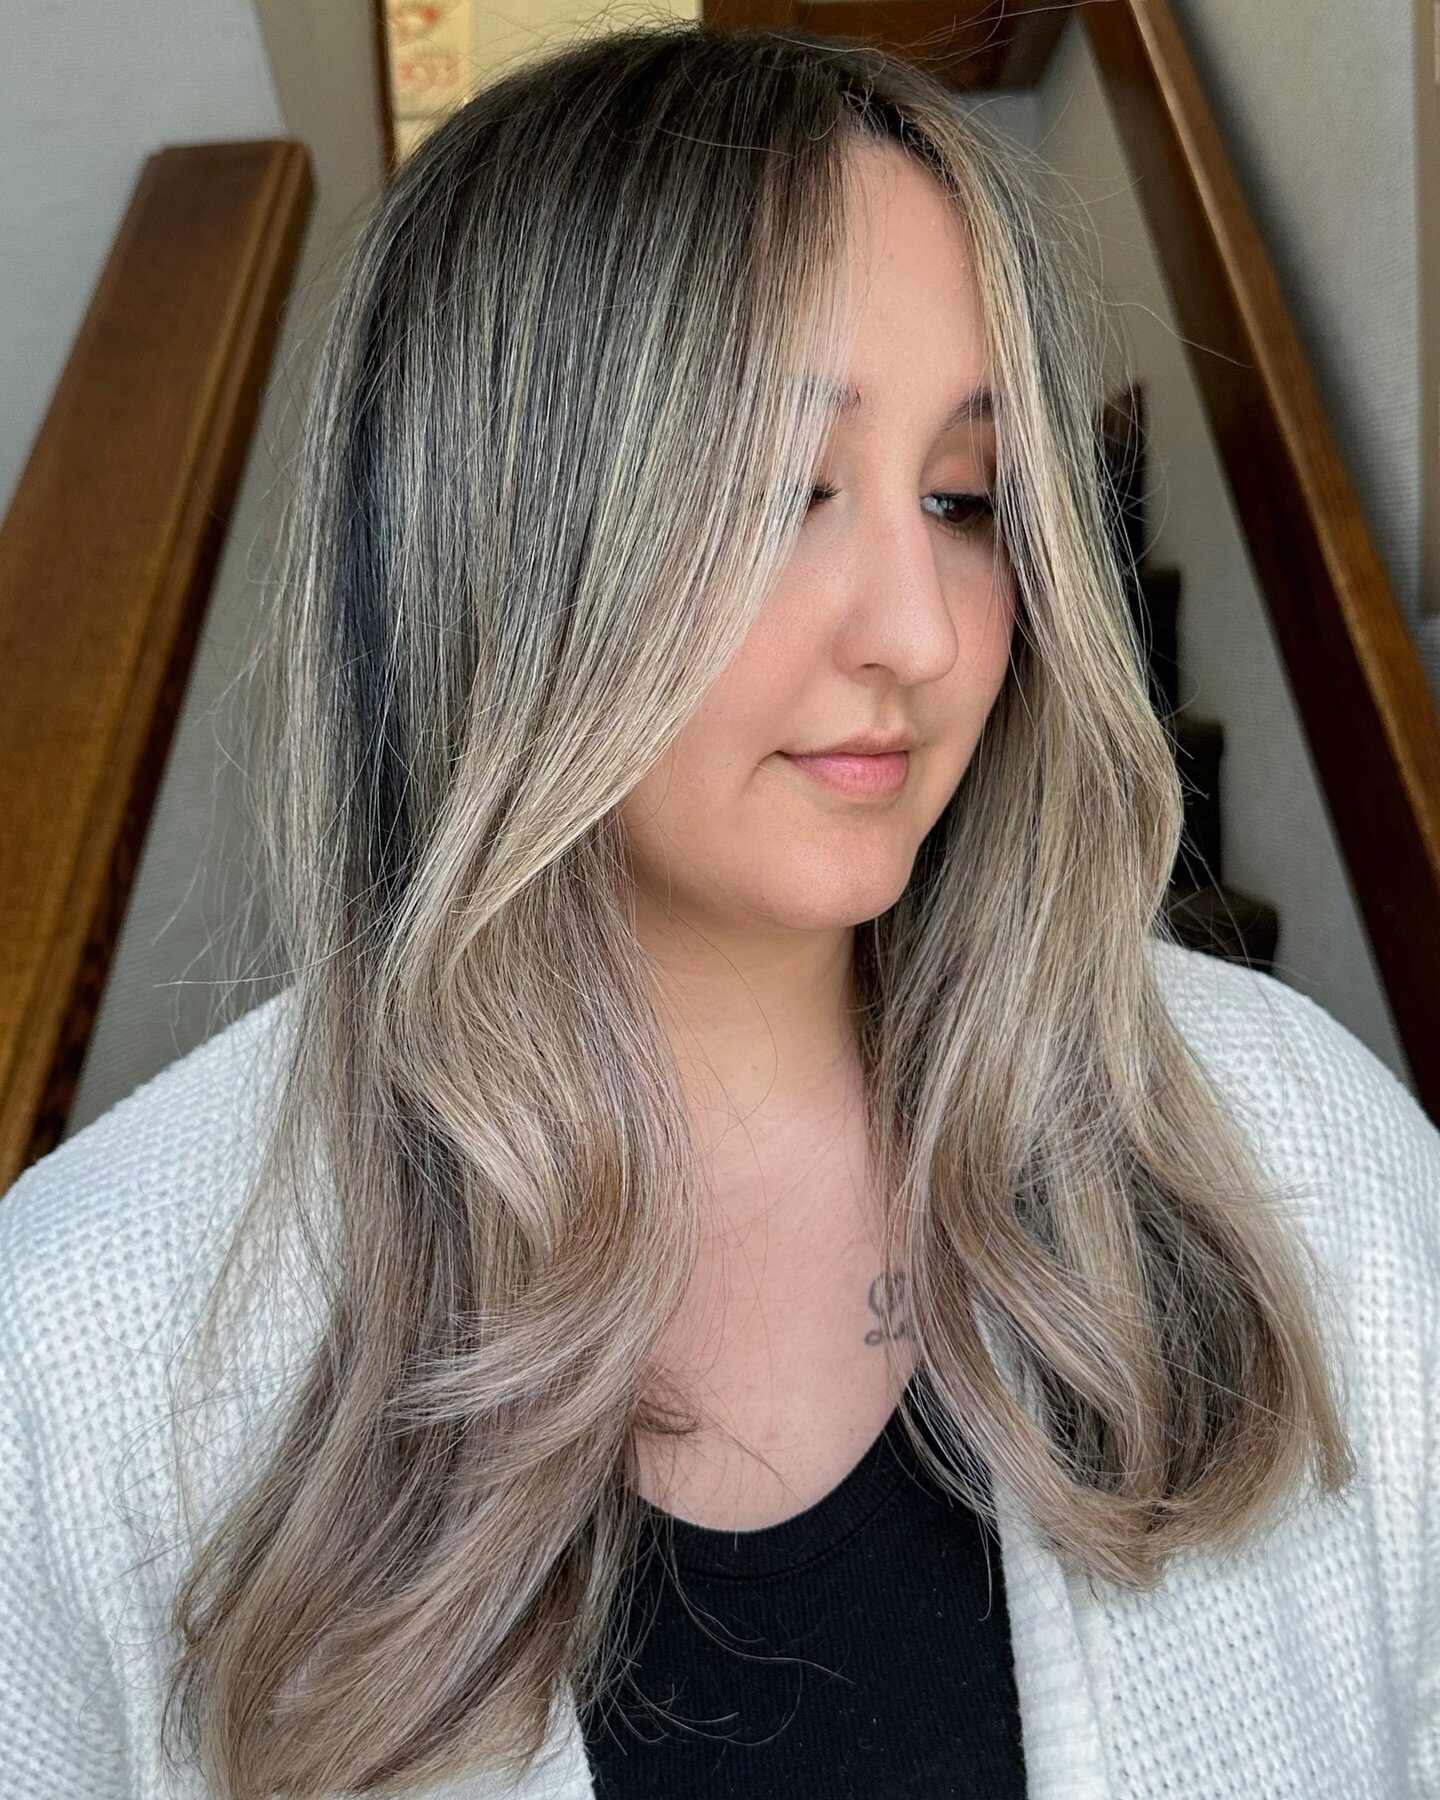 You can still have seamless blonde even when your natural hair is super dark.